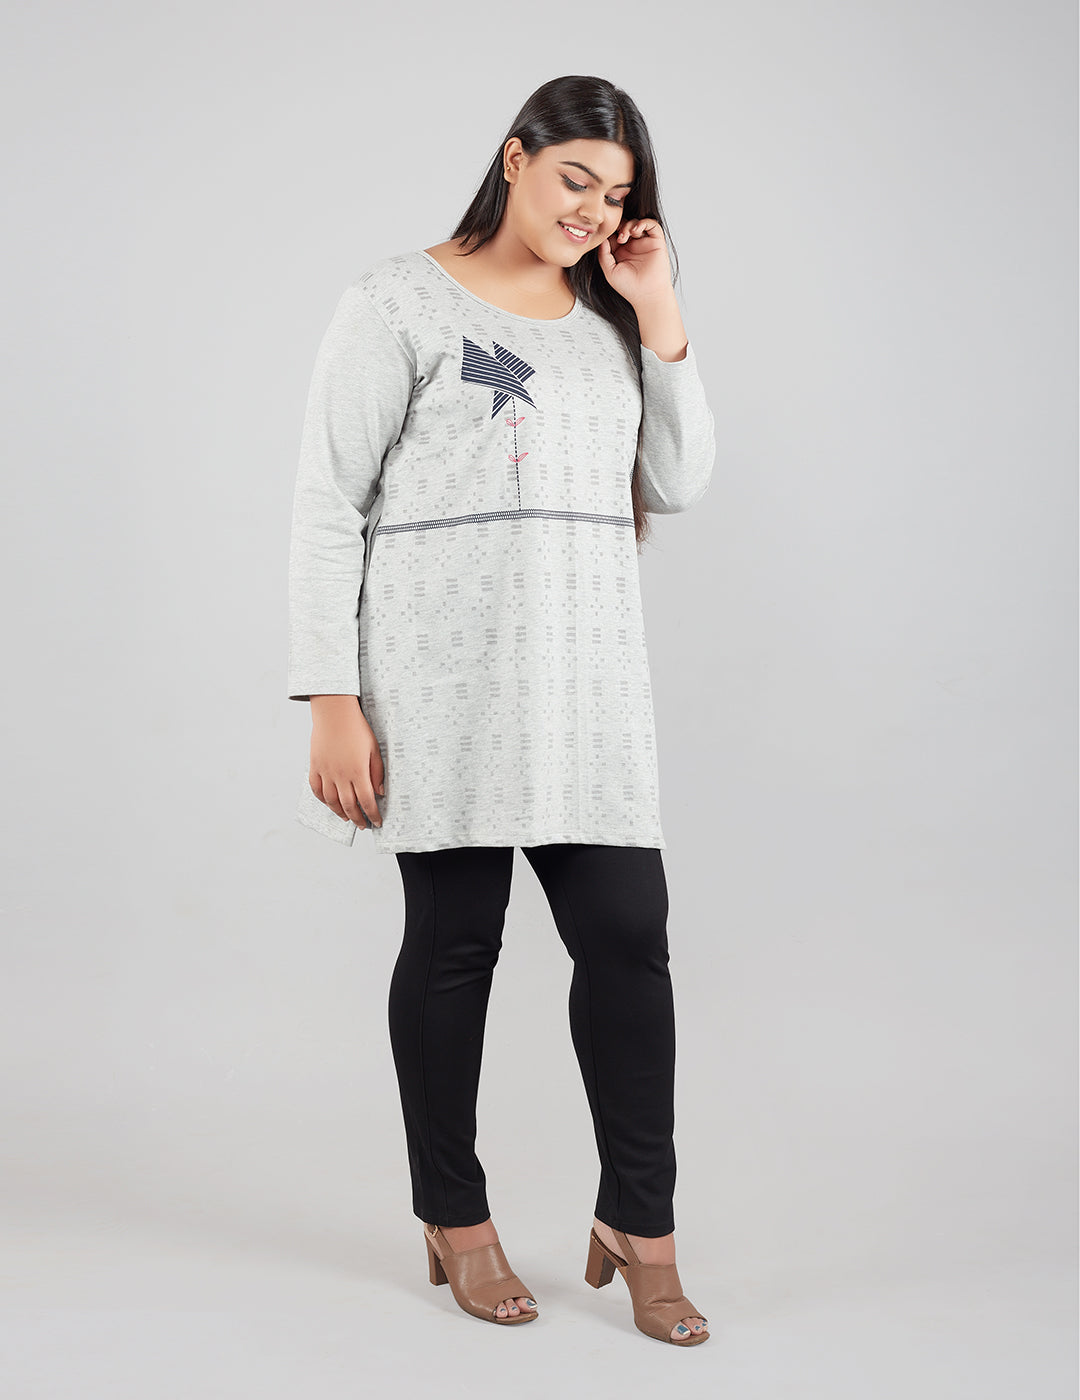 Breezy Plus Size Print Long Tops For Women Full Sleeves At Best Price